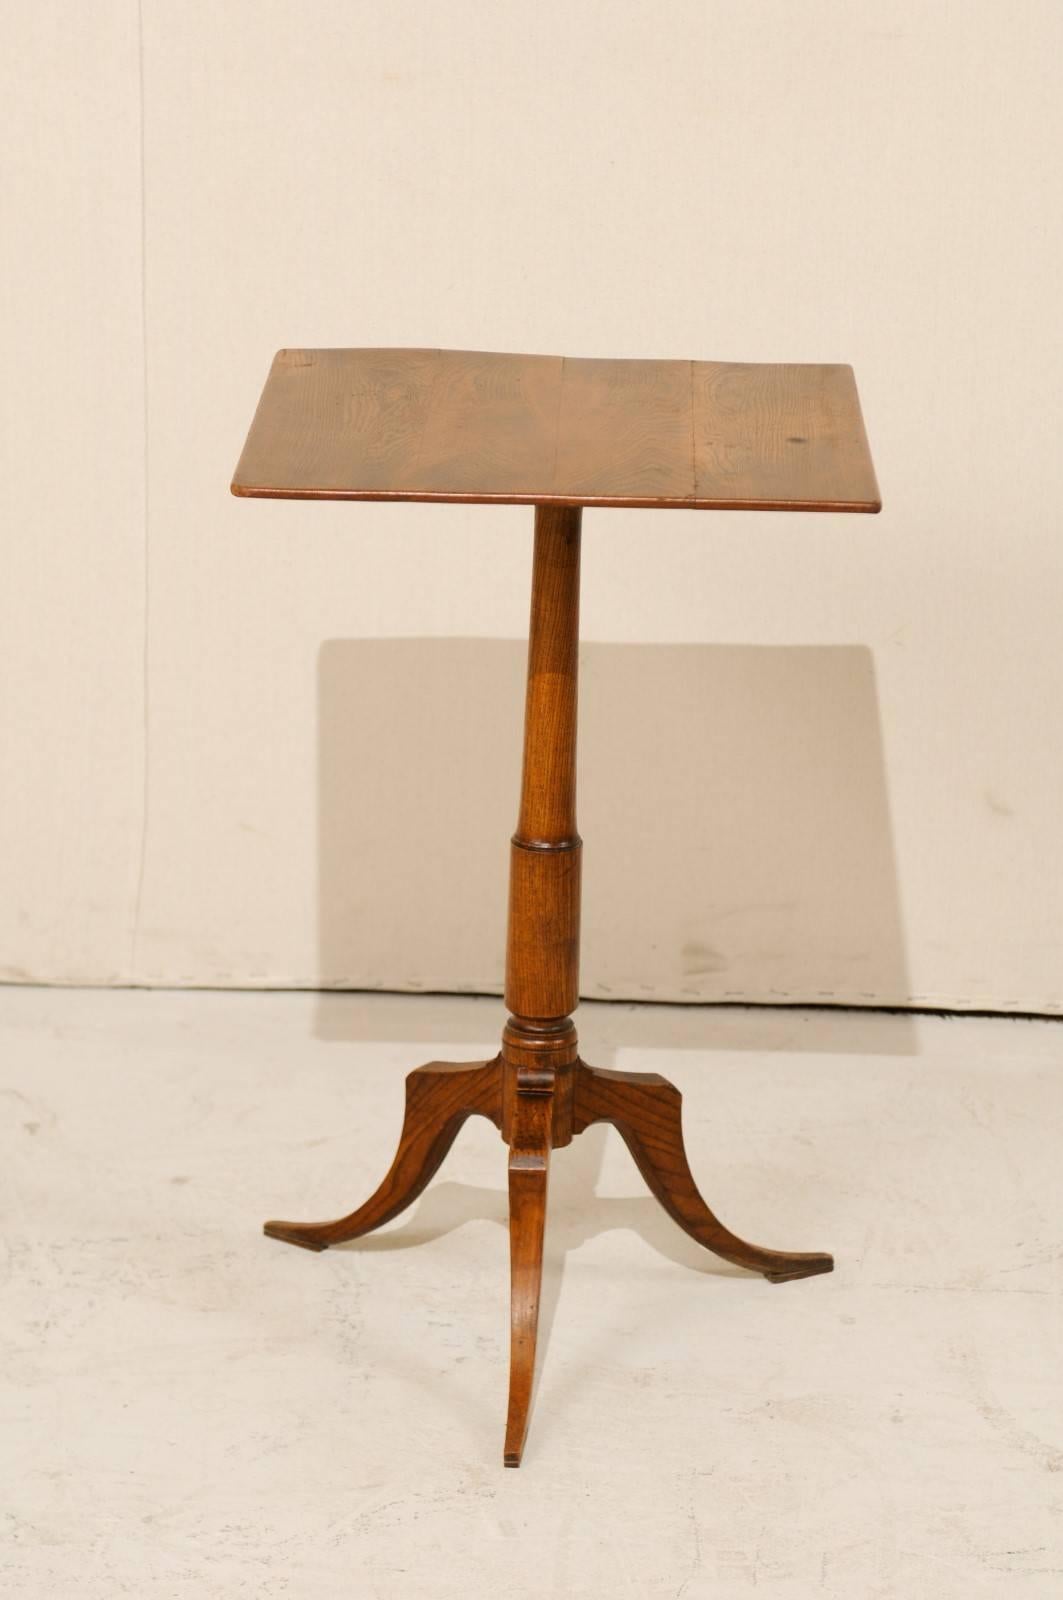 Carved Swedish 19th Century Elmwood Side Table with Lovely Wood Grain and Square Top